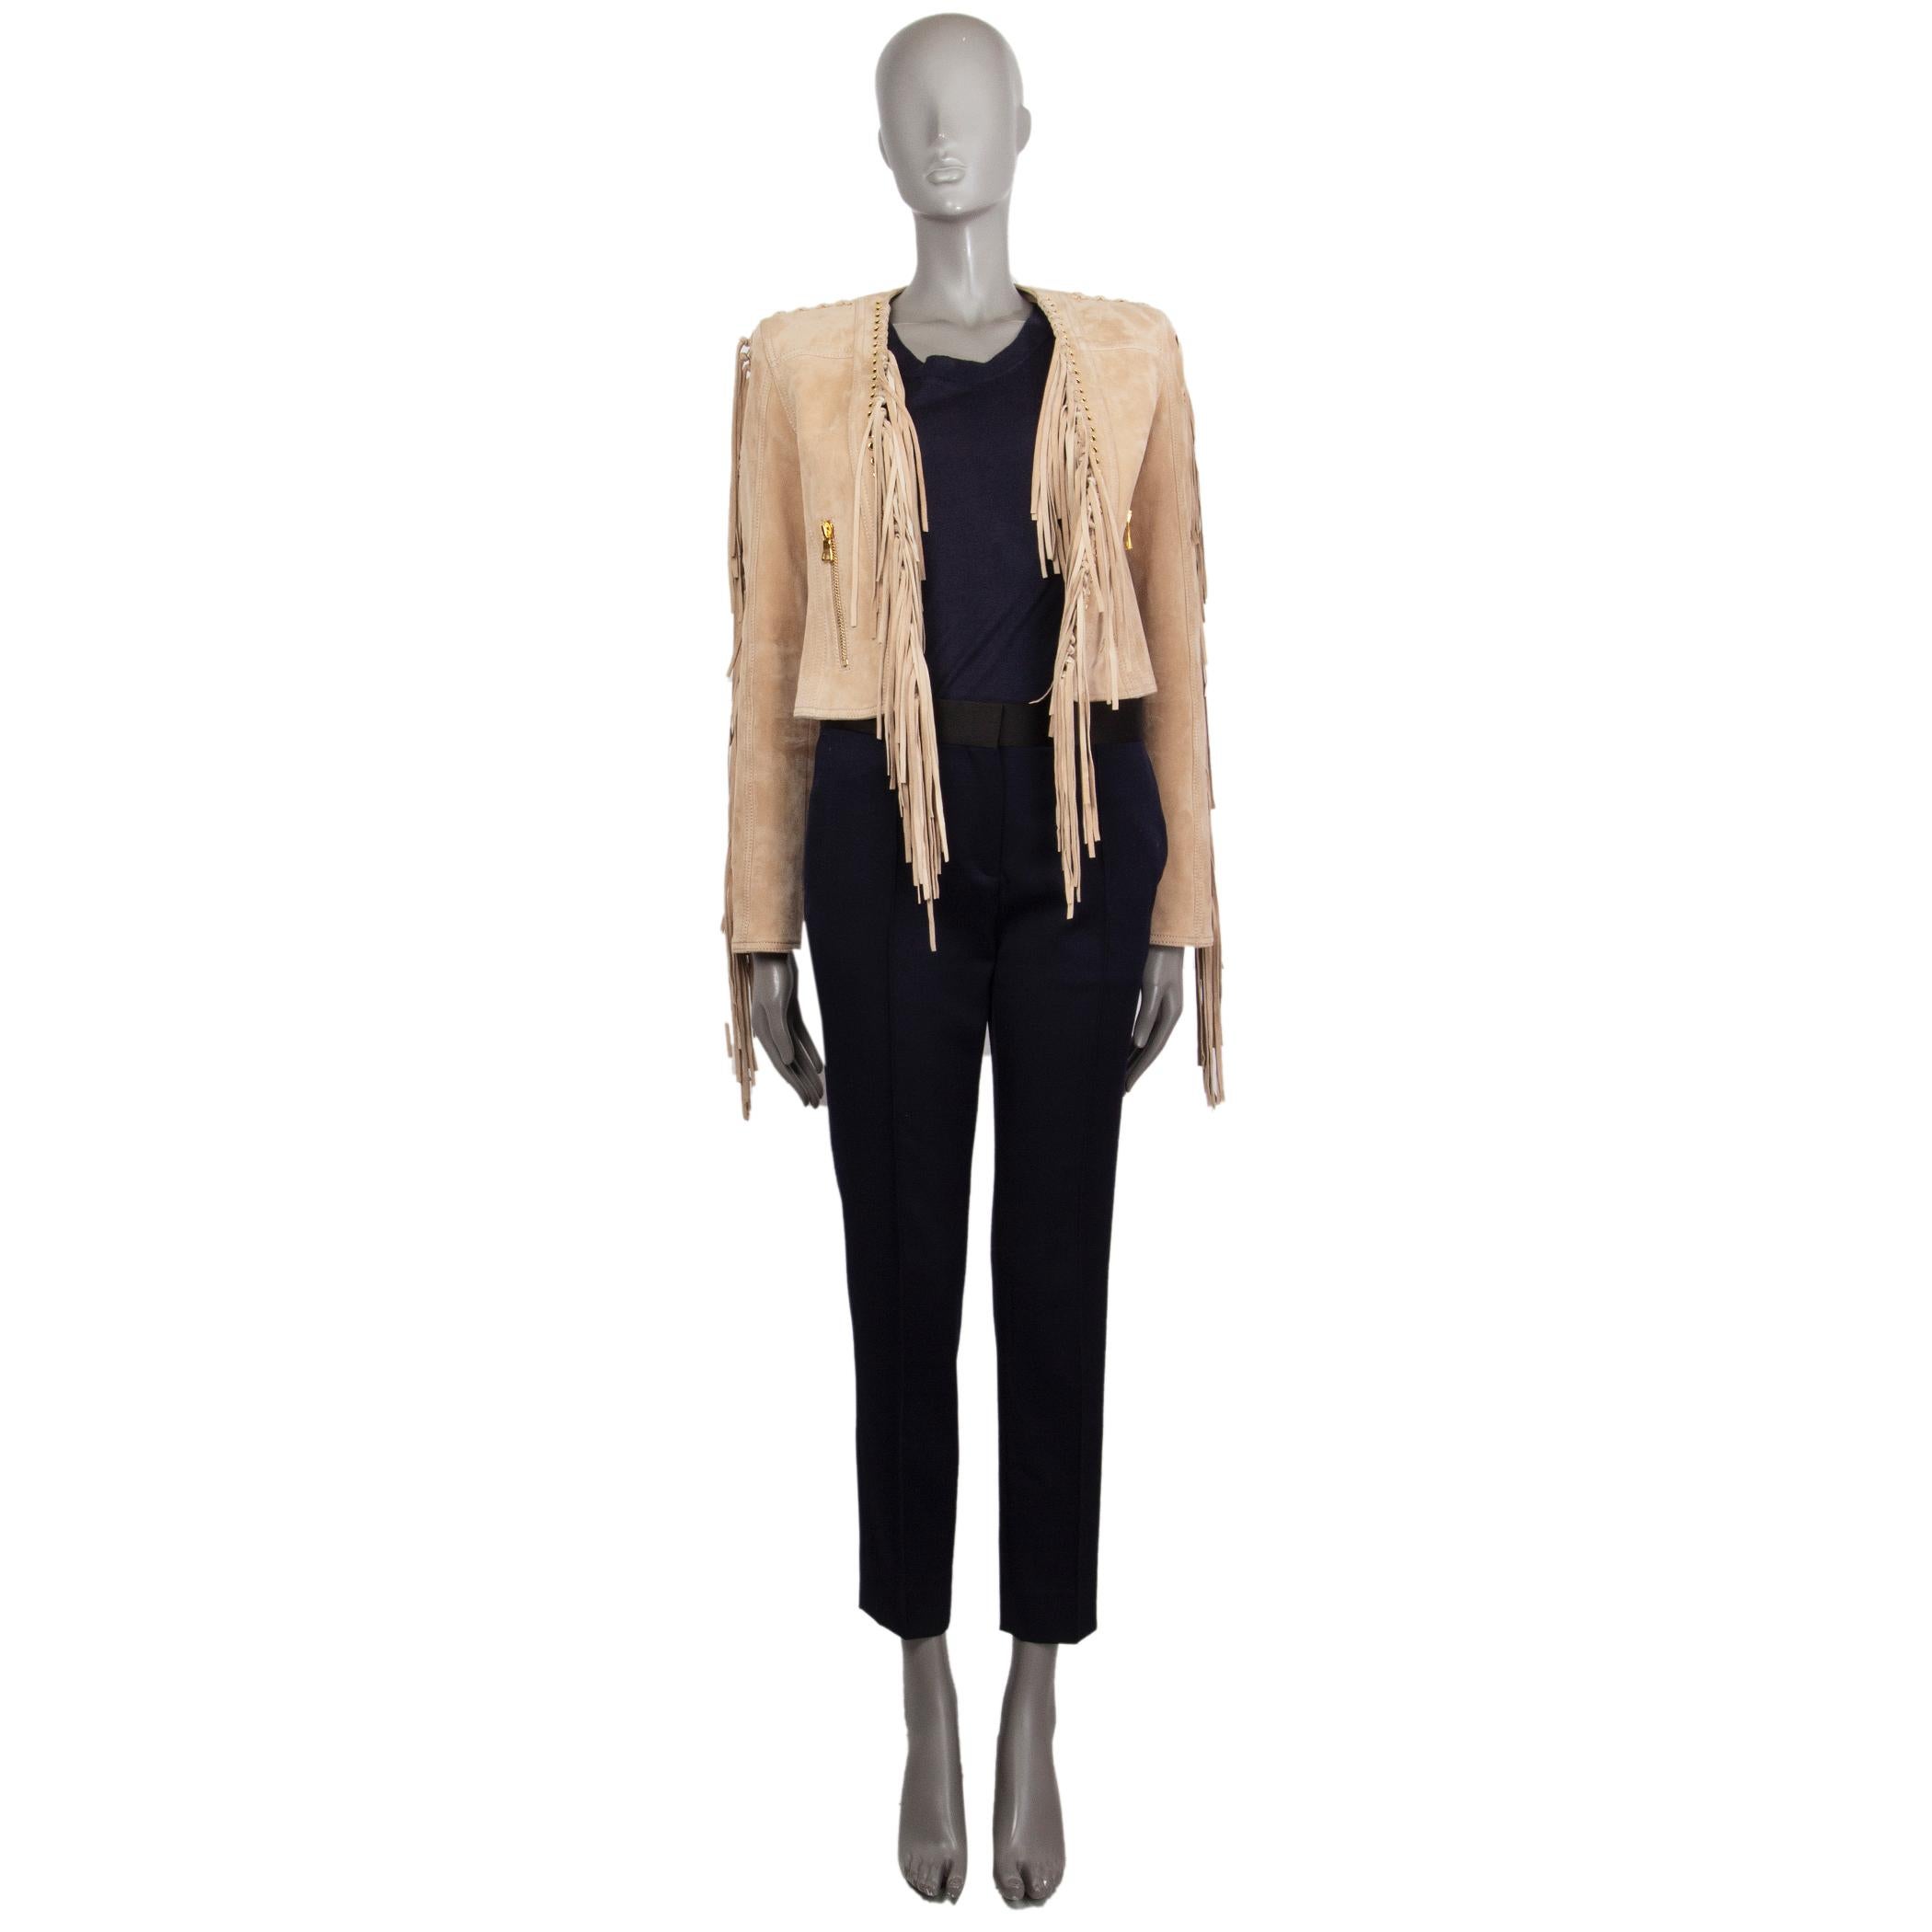 Balmain cropped fringed jacket in beige lambskin (100%) with an open front detailed with fringes along the seam down, two front zipped pockets, long sleeve. Features some  on the side Linded viscose (52%) cotton (48%). Has been worn and is in